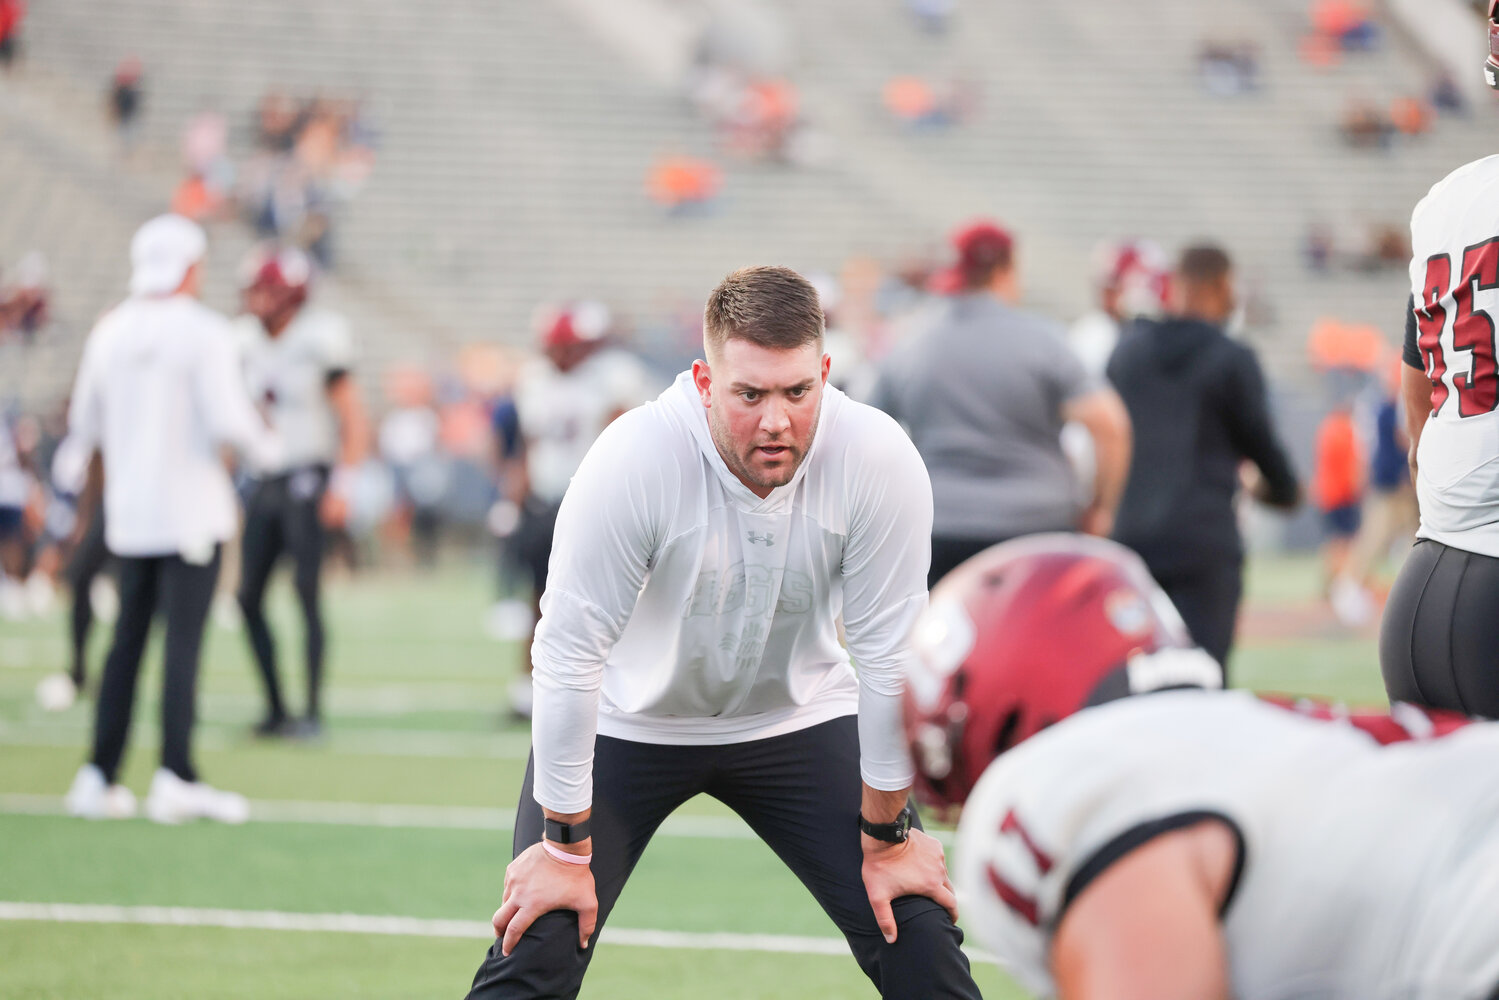 Granbury High School graduate Tyler Wright — current assistant coach and special teams coordinator for the New Mexico State University football team — was chosen from a field of over 175 highly qualified applications and was named to the National Football Coaches Association 35 Under 35 Leadership Institute.